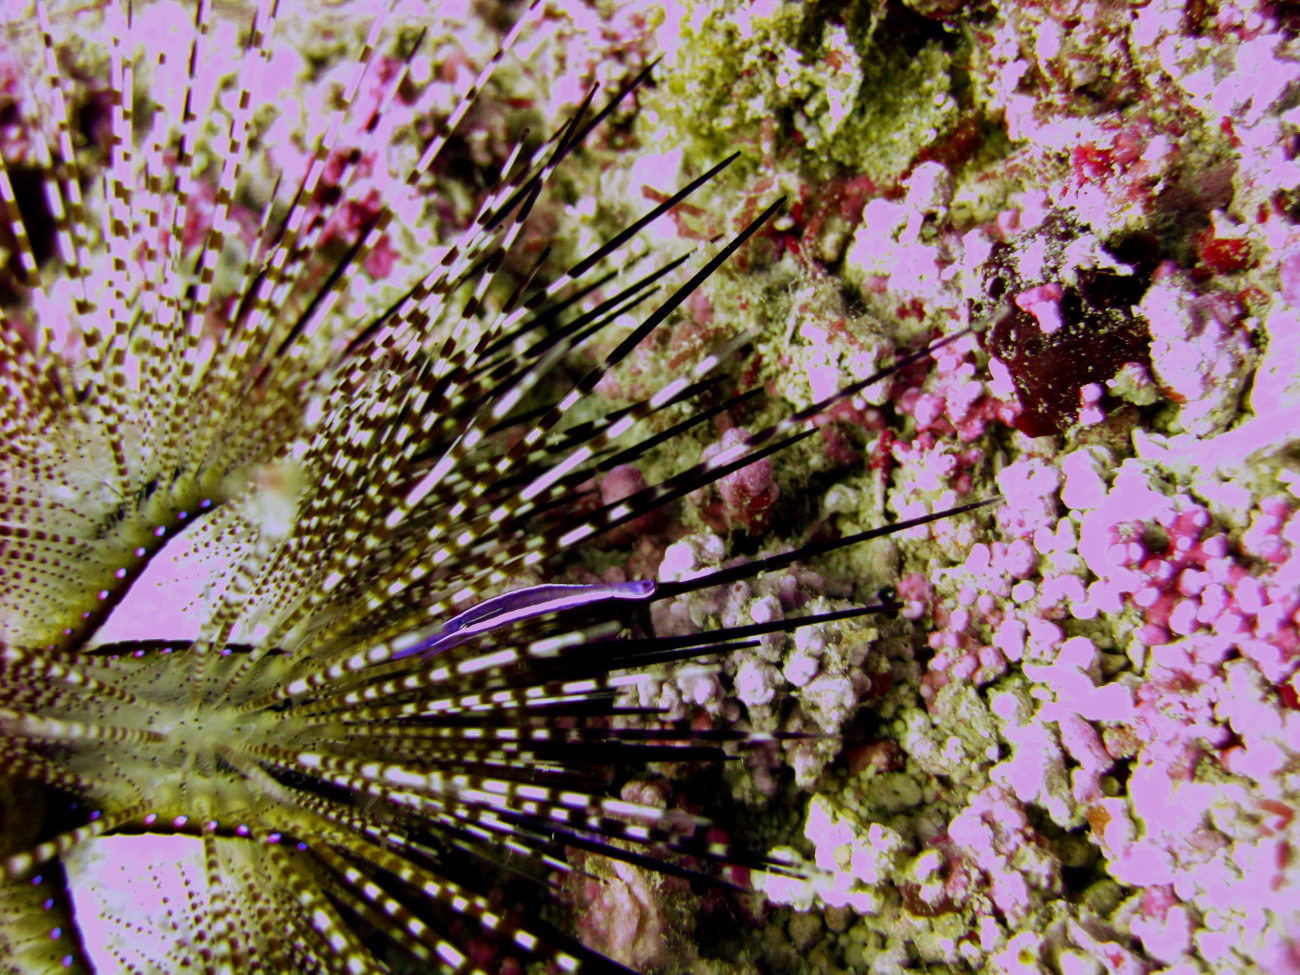 Diadema sea urchin with small fish on spine